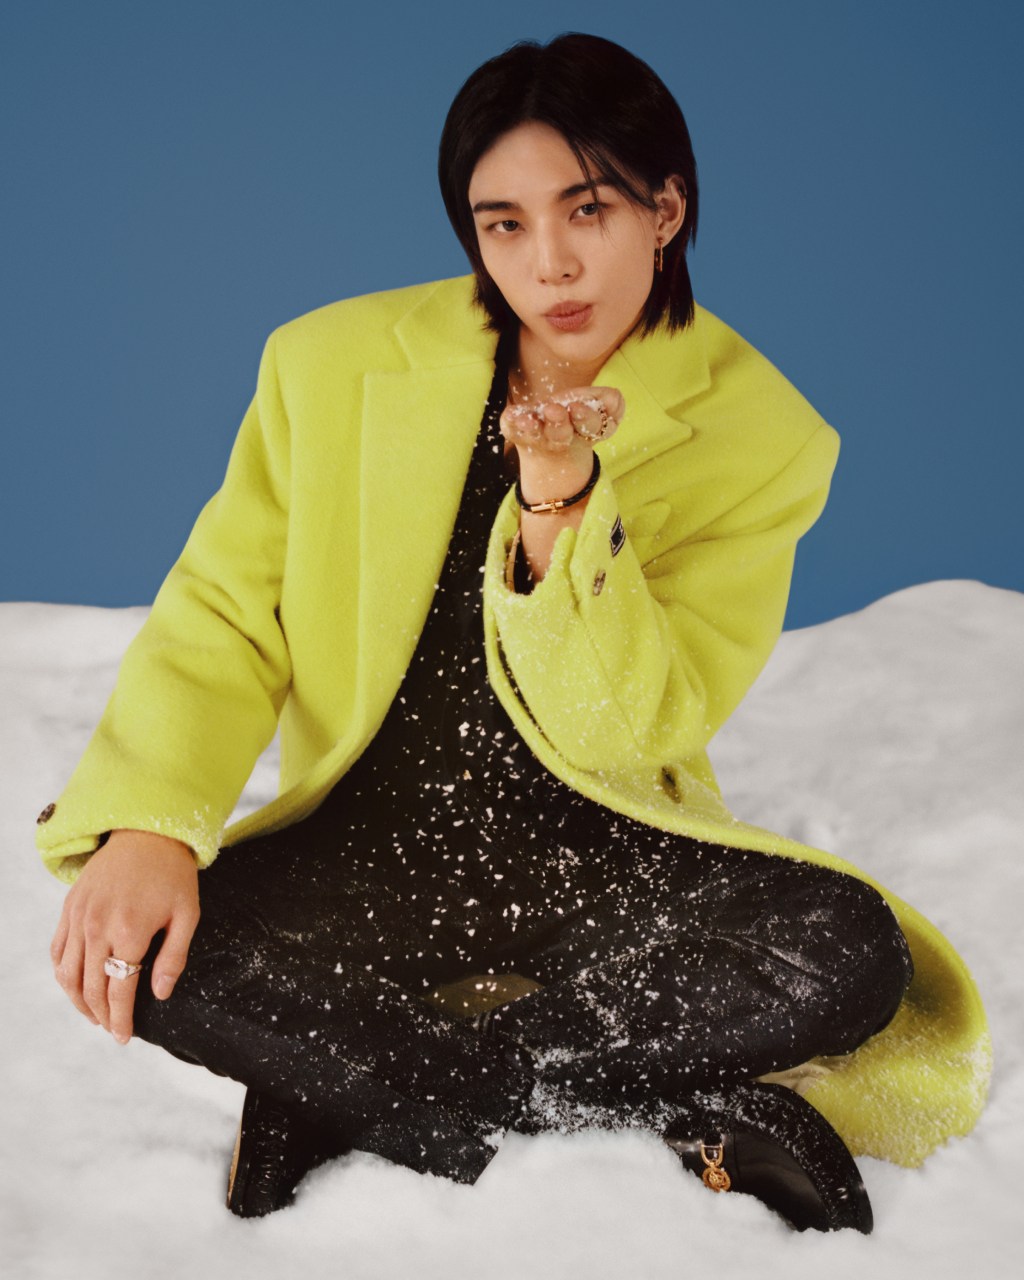 stray-kids’-hyunjin-gets-festive-in-versace-holiday-ad campaign